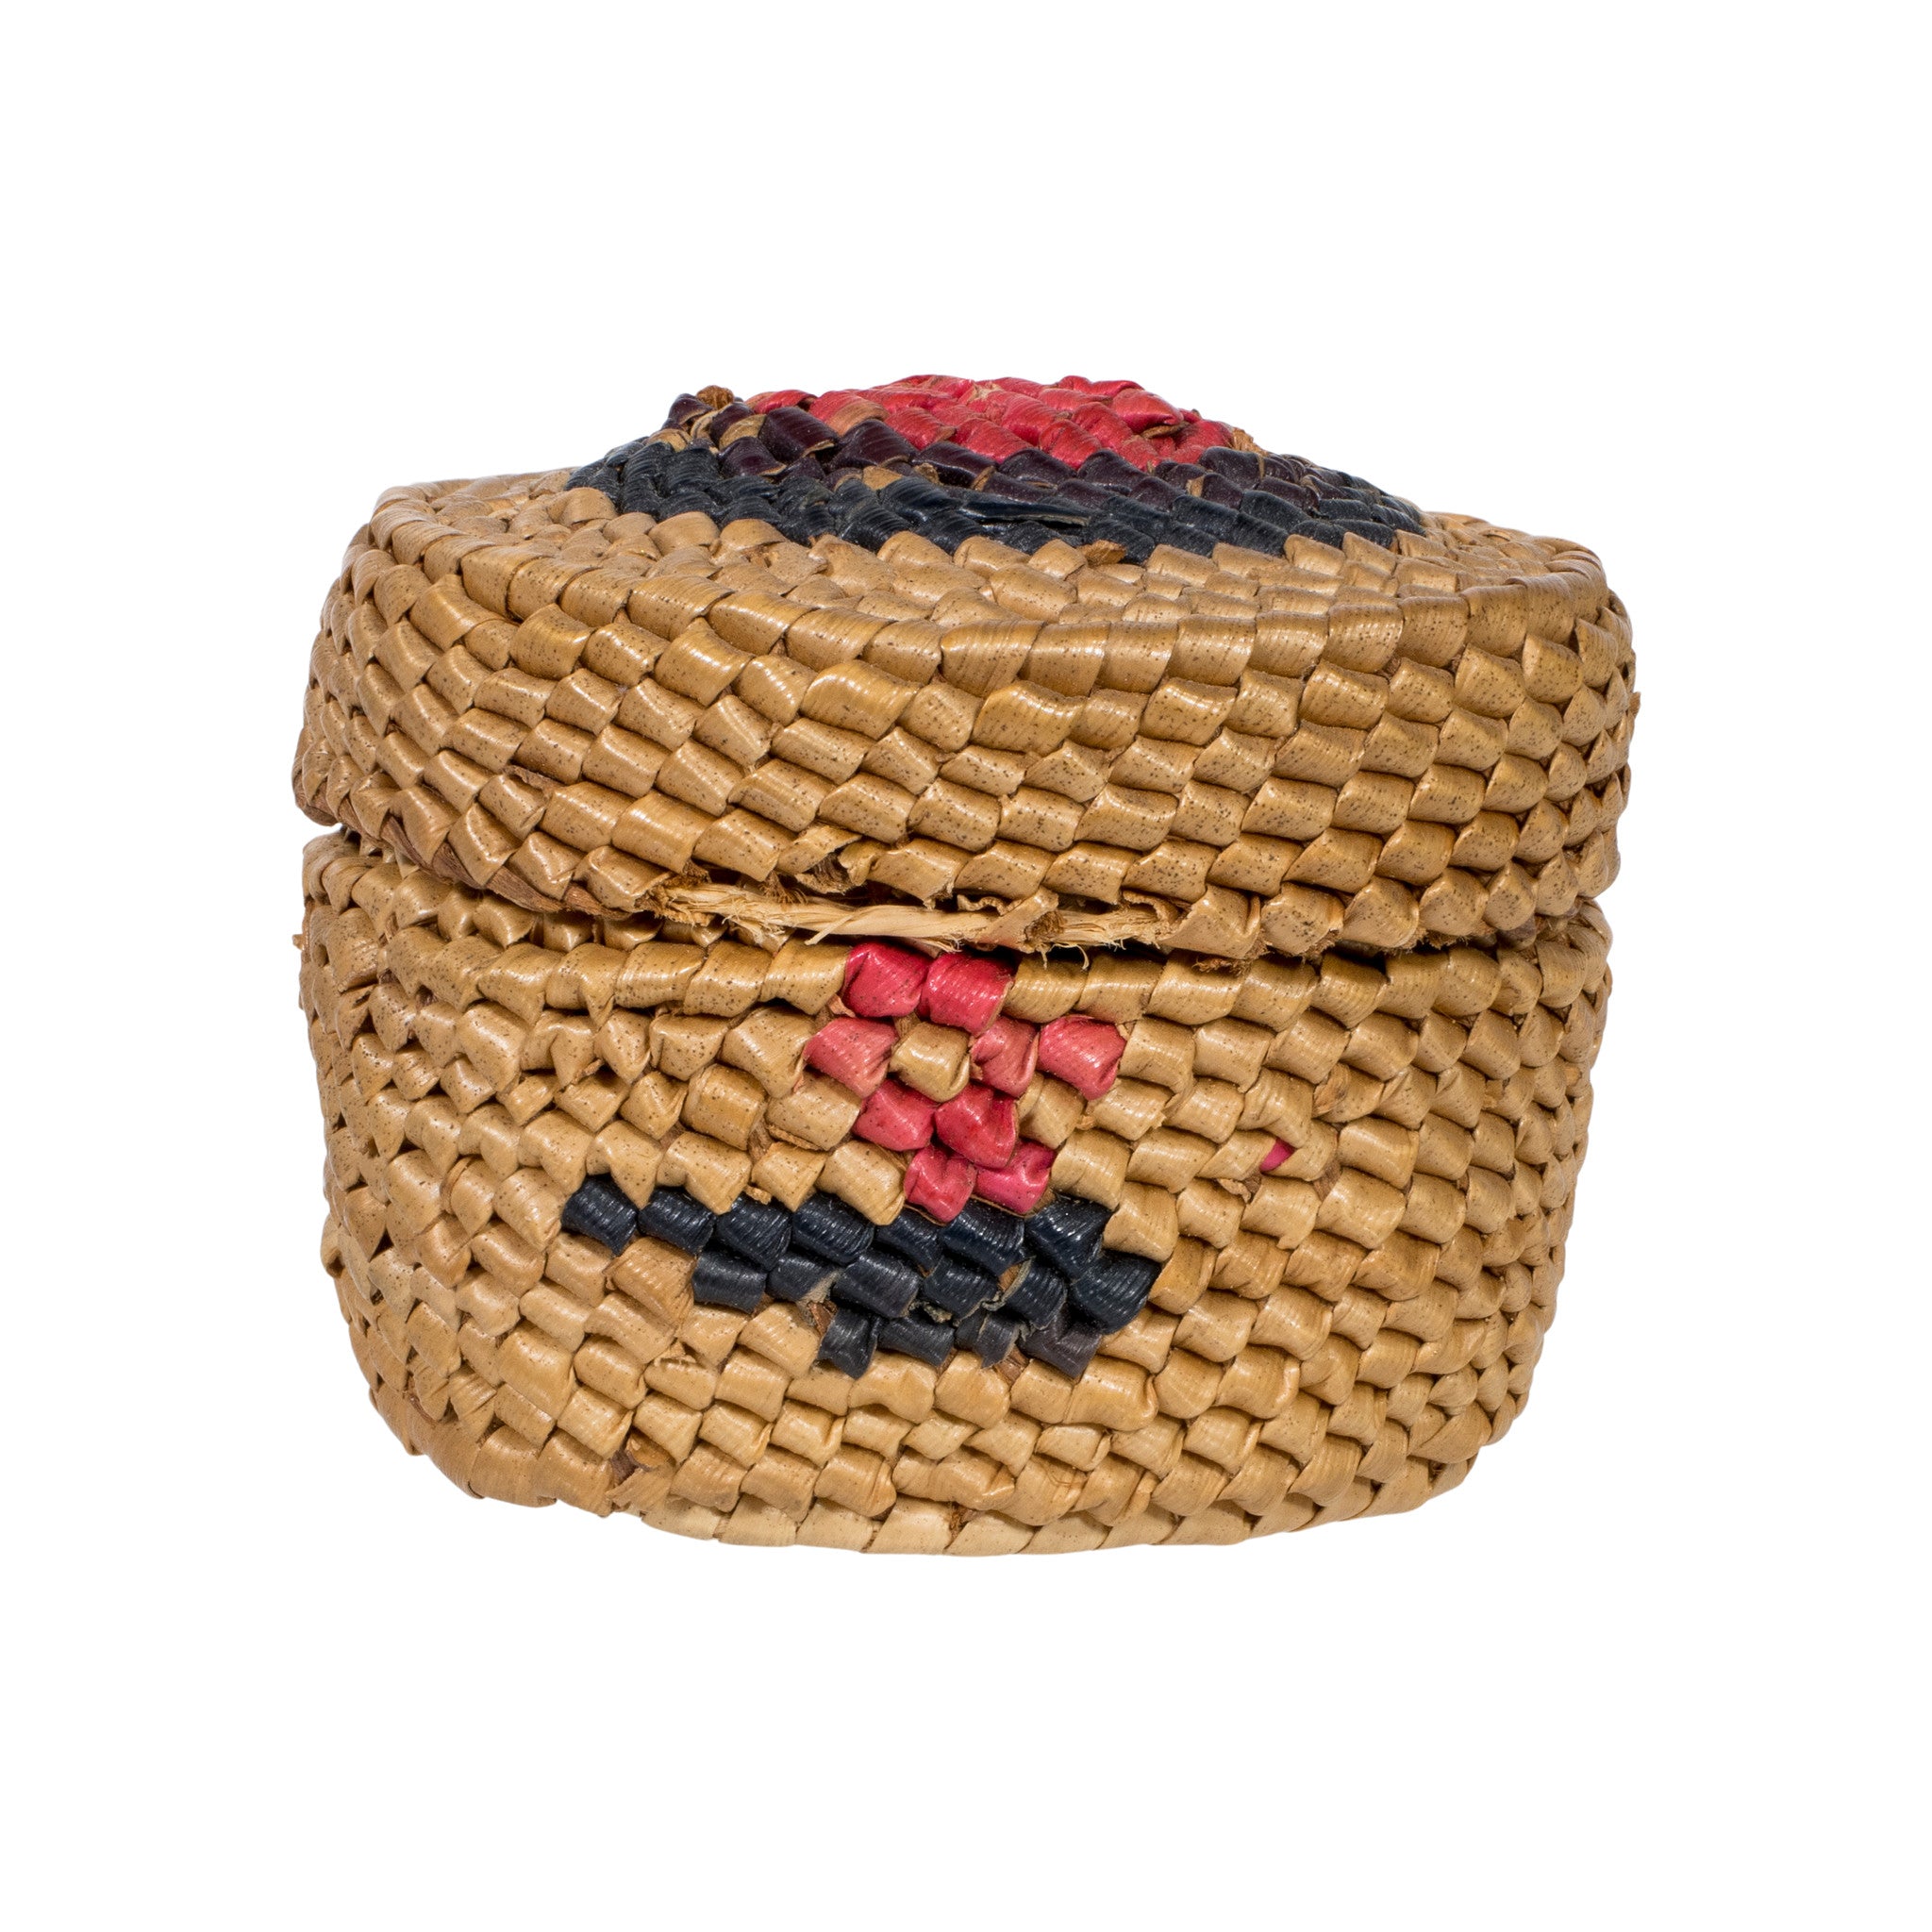 Collection of Makah Trinket Baskets